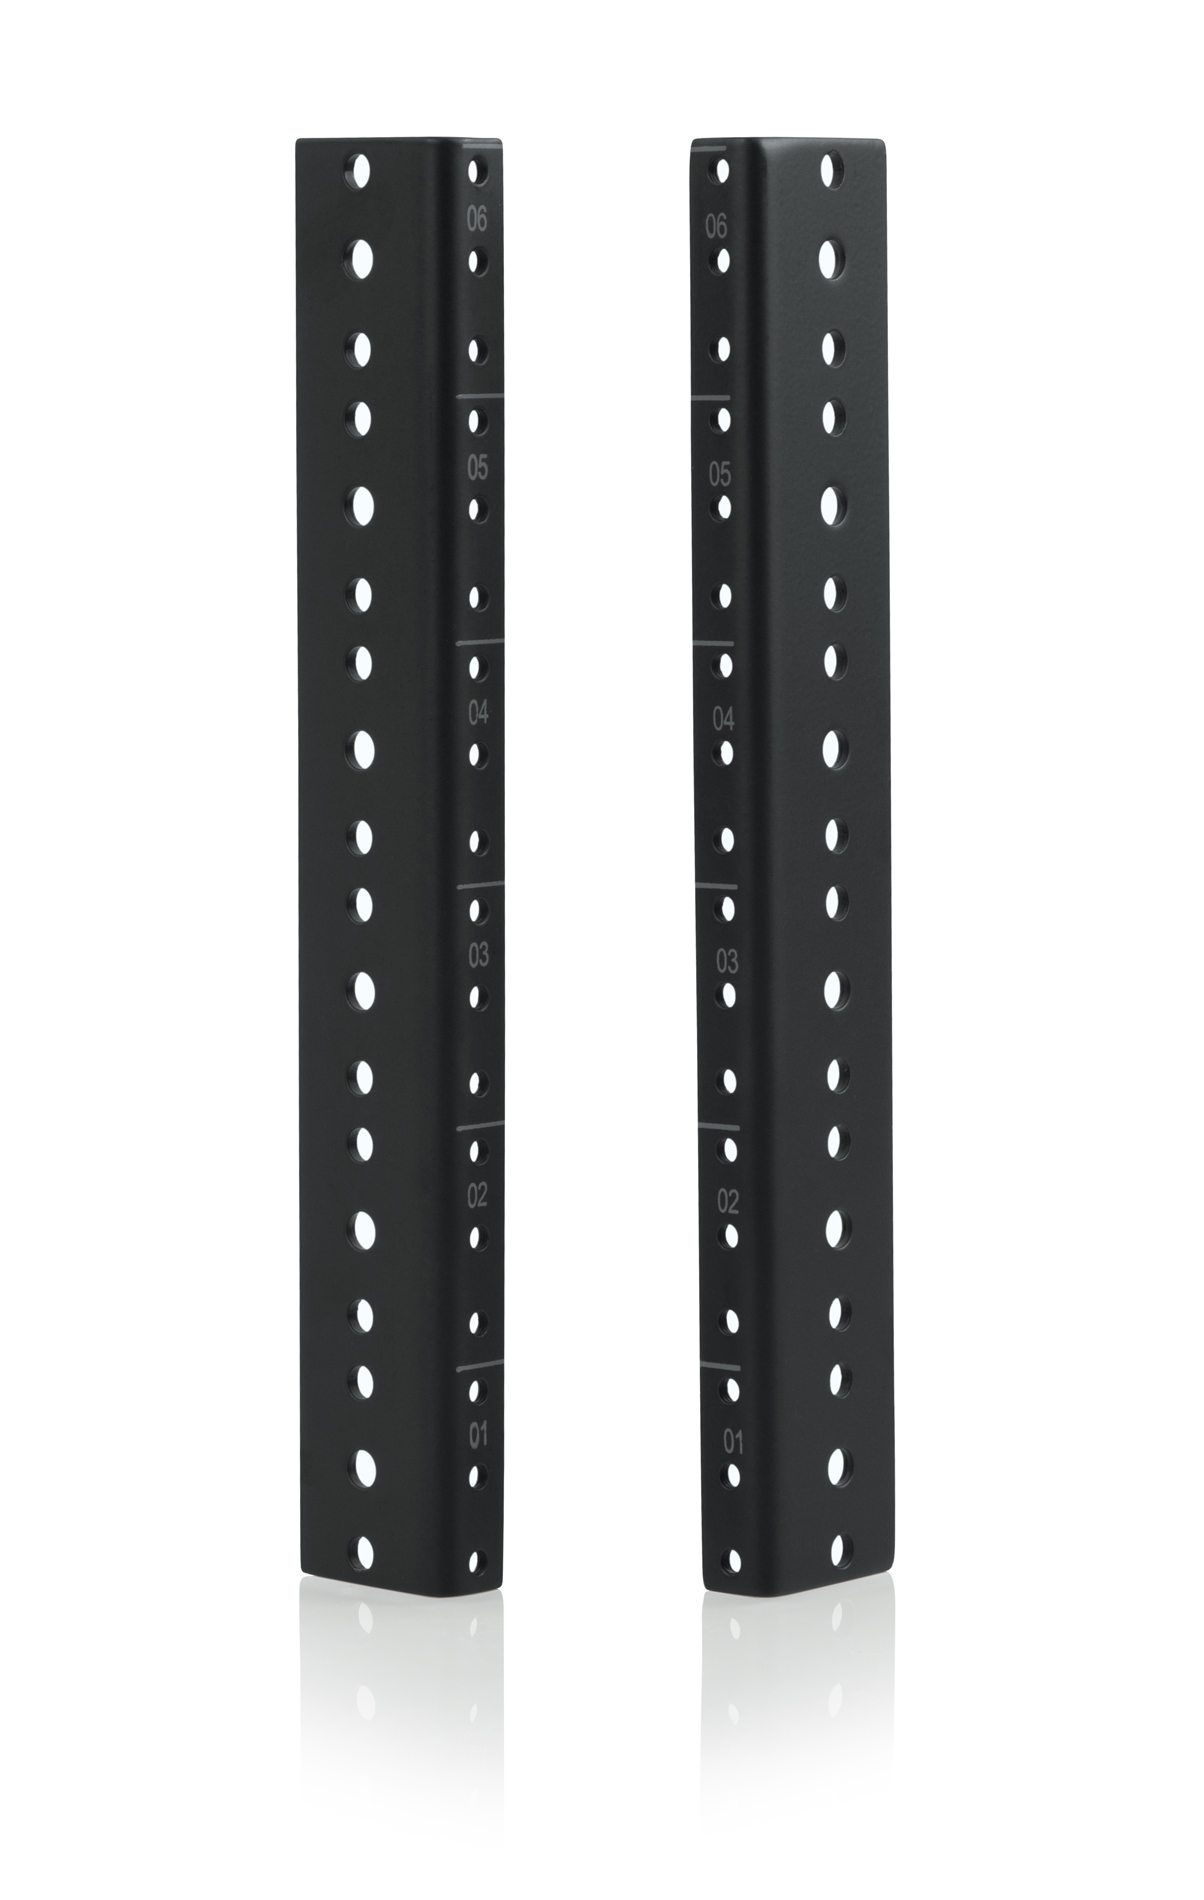 Sound Town 4-pack 12U Steel Rack Rails with Black Powder Coated Finish and Screws ST-RR-12UX2